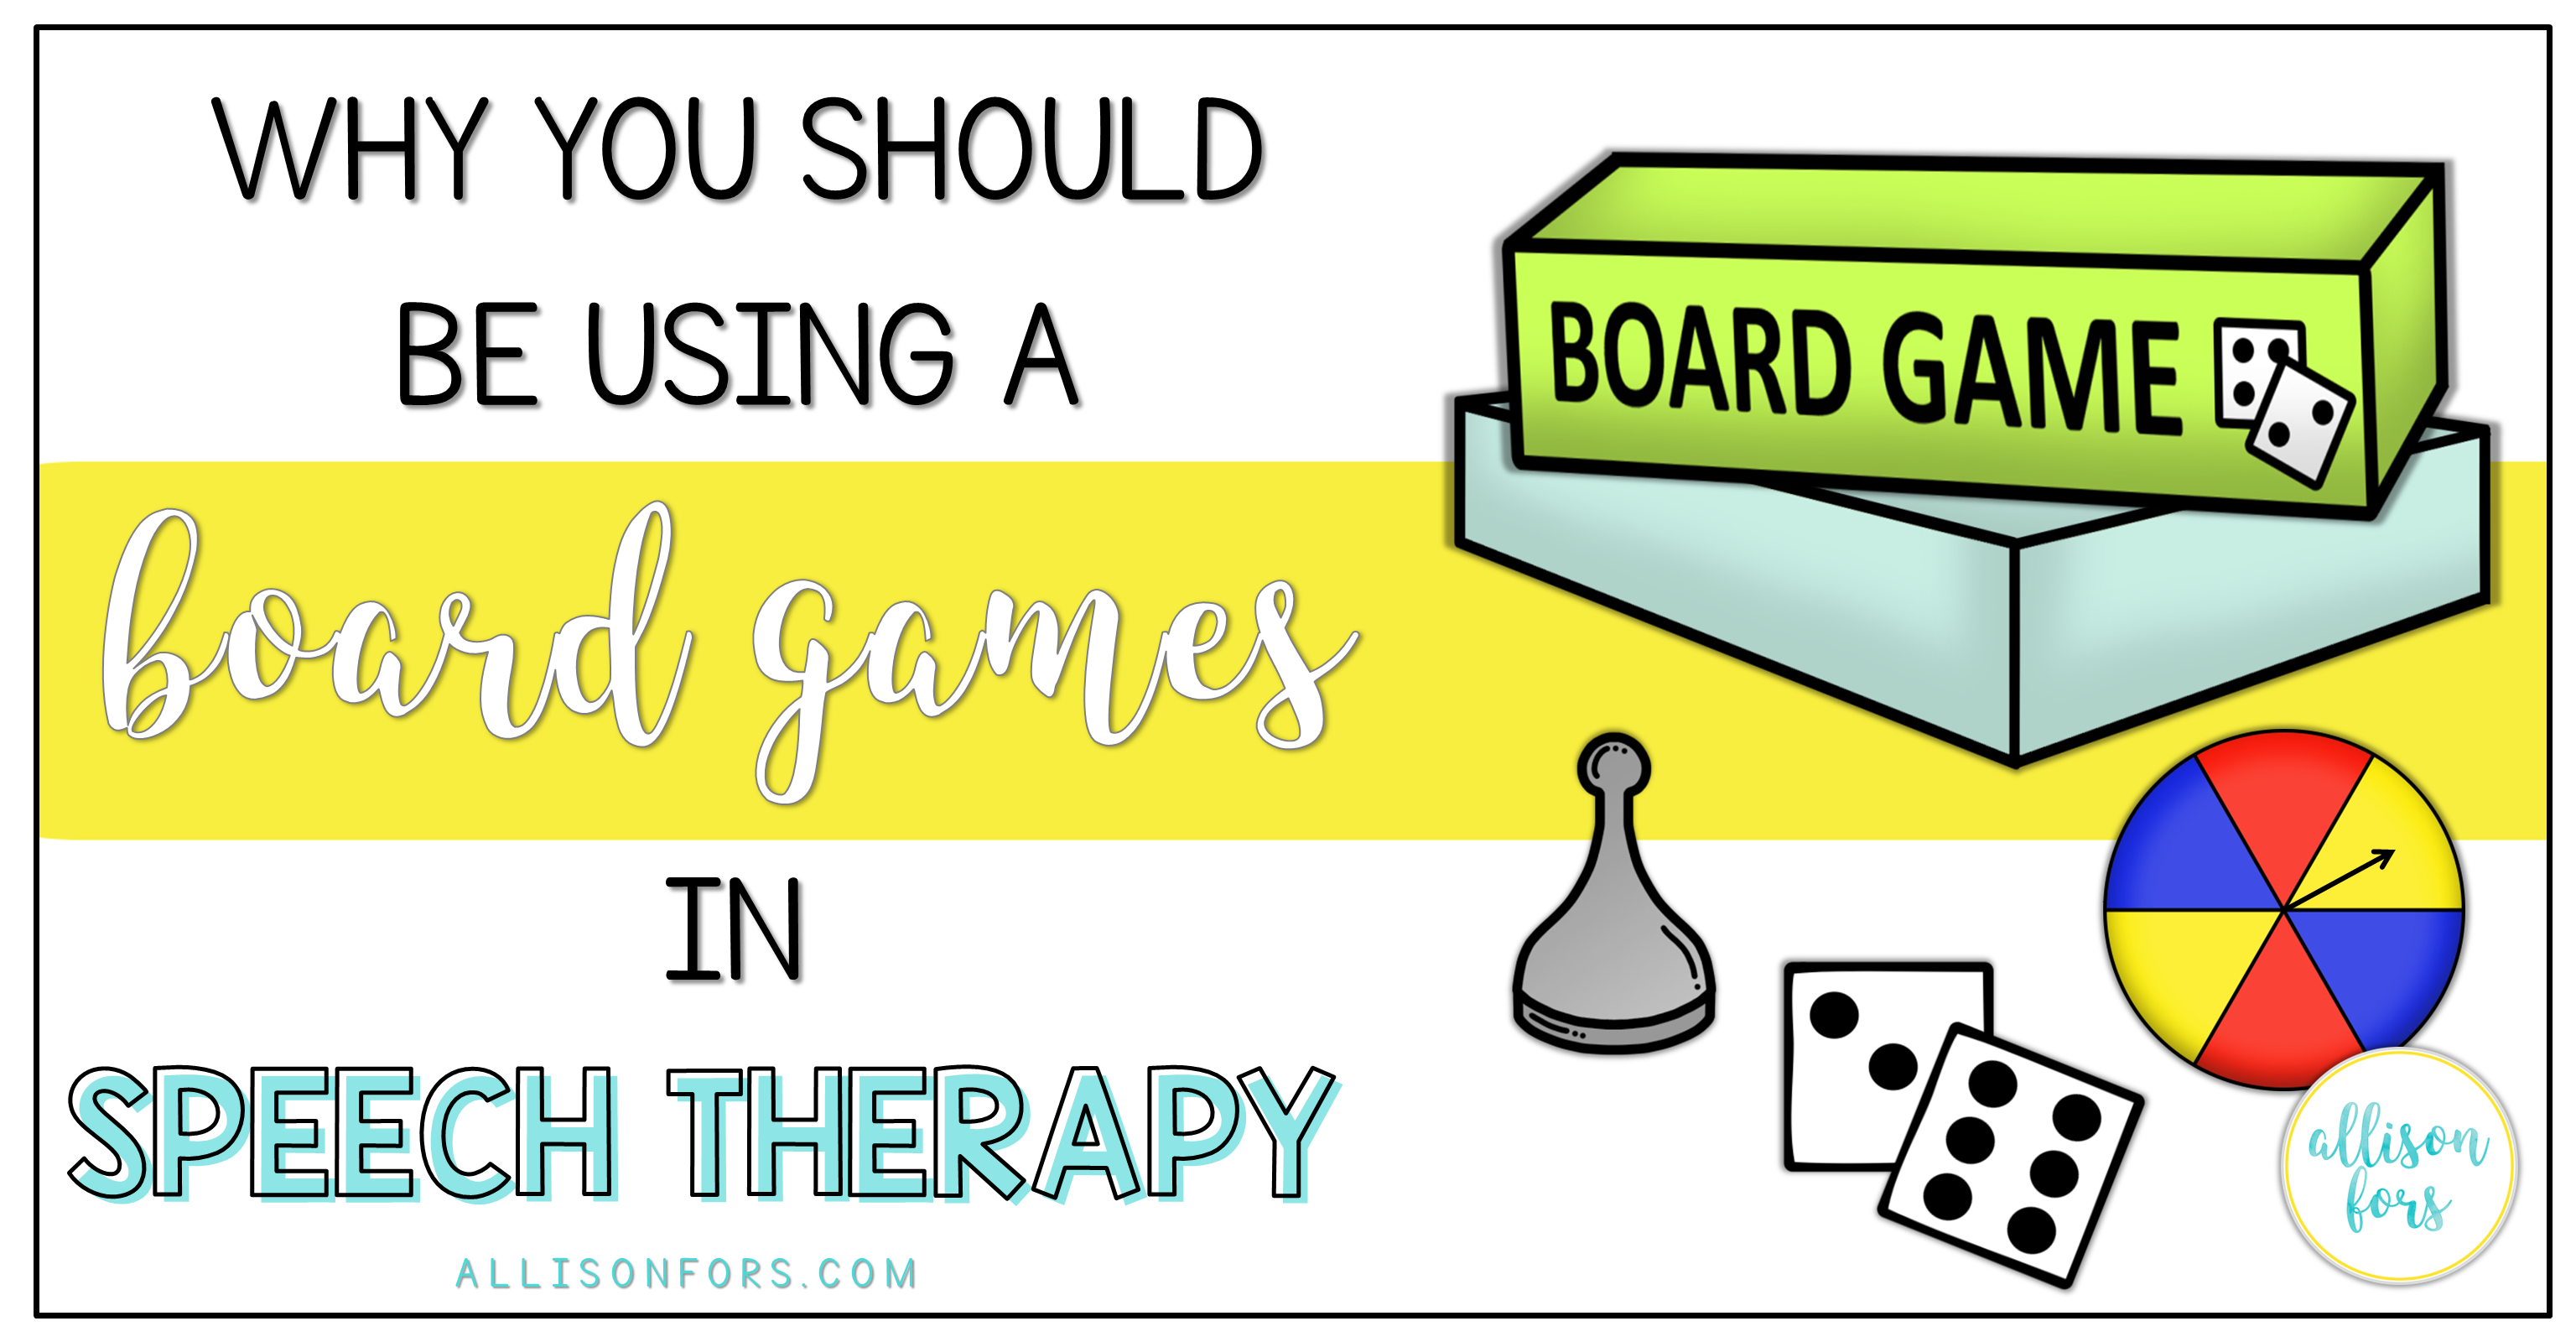 Why You Should Be Using Board Games in Speech Therapy